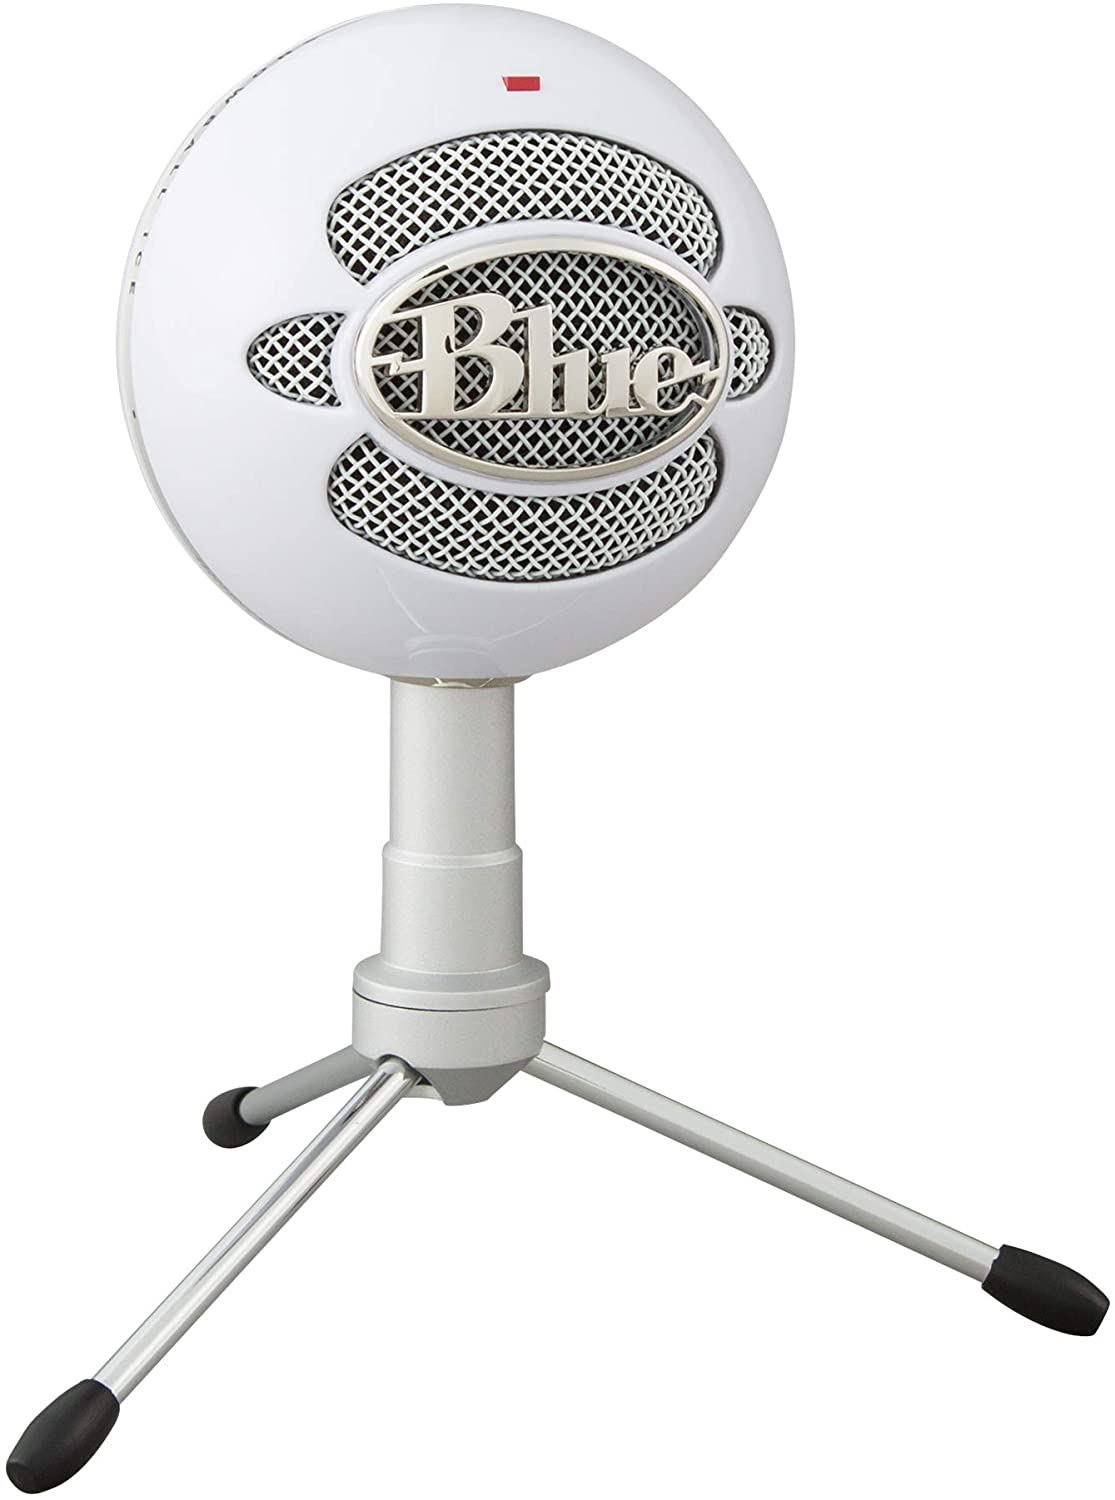 Blue snowball ice usb mic for recording